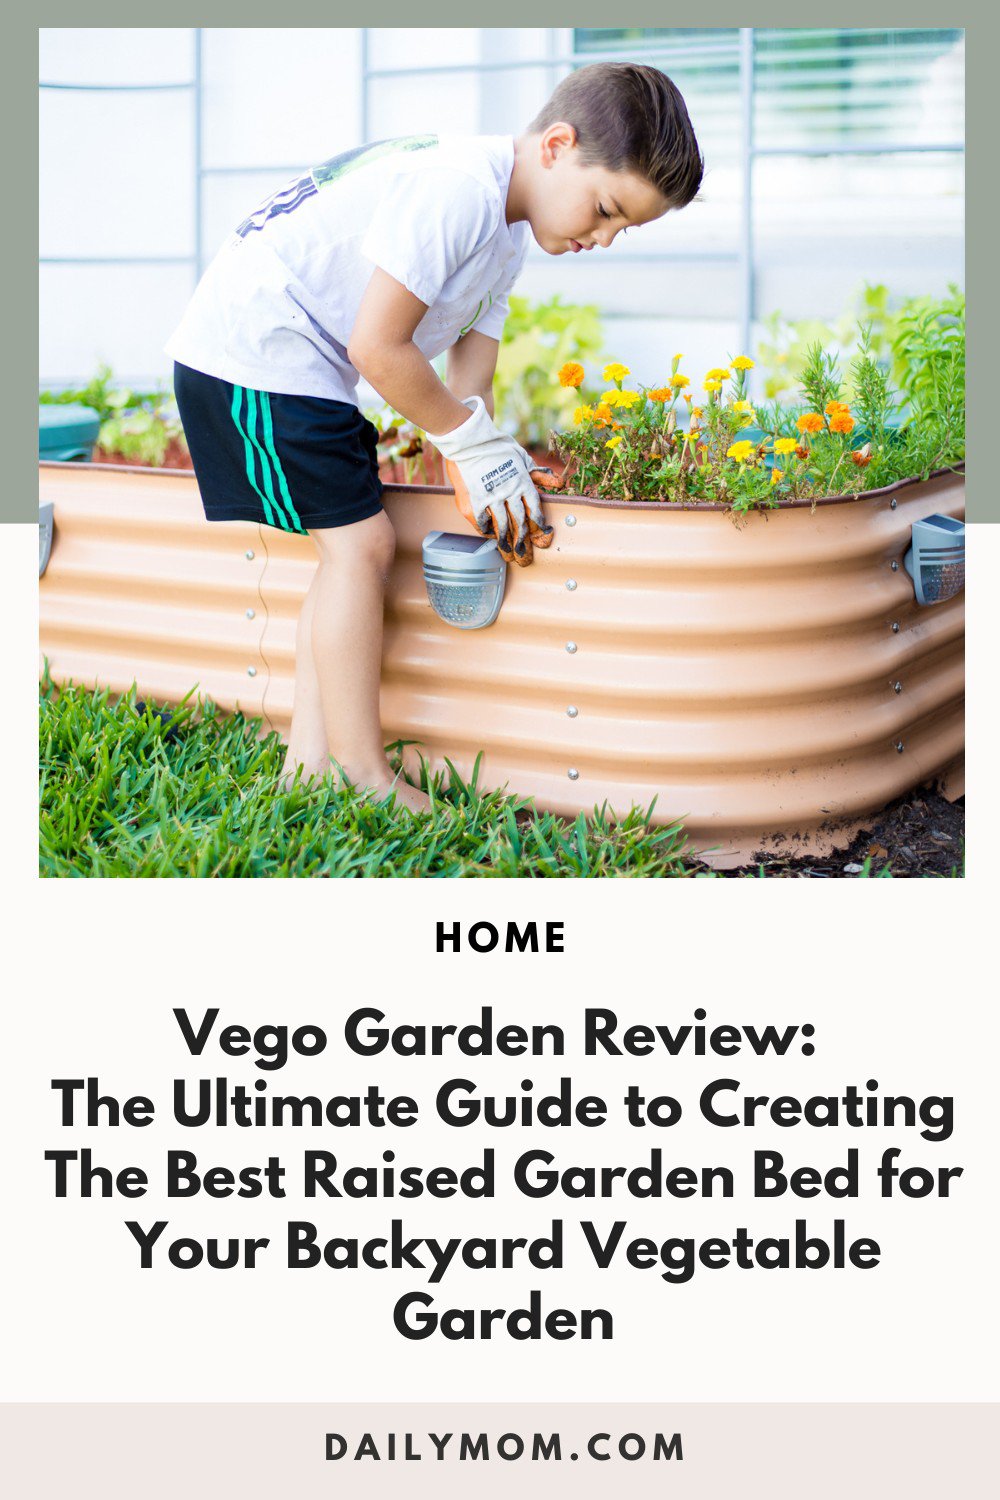 Vego Garden Review: The Ultimate Guide To Creating The Best Raised Garden Bed For Your Backyard Vegetable Garden 12 Daily Mom, Magazine For Families